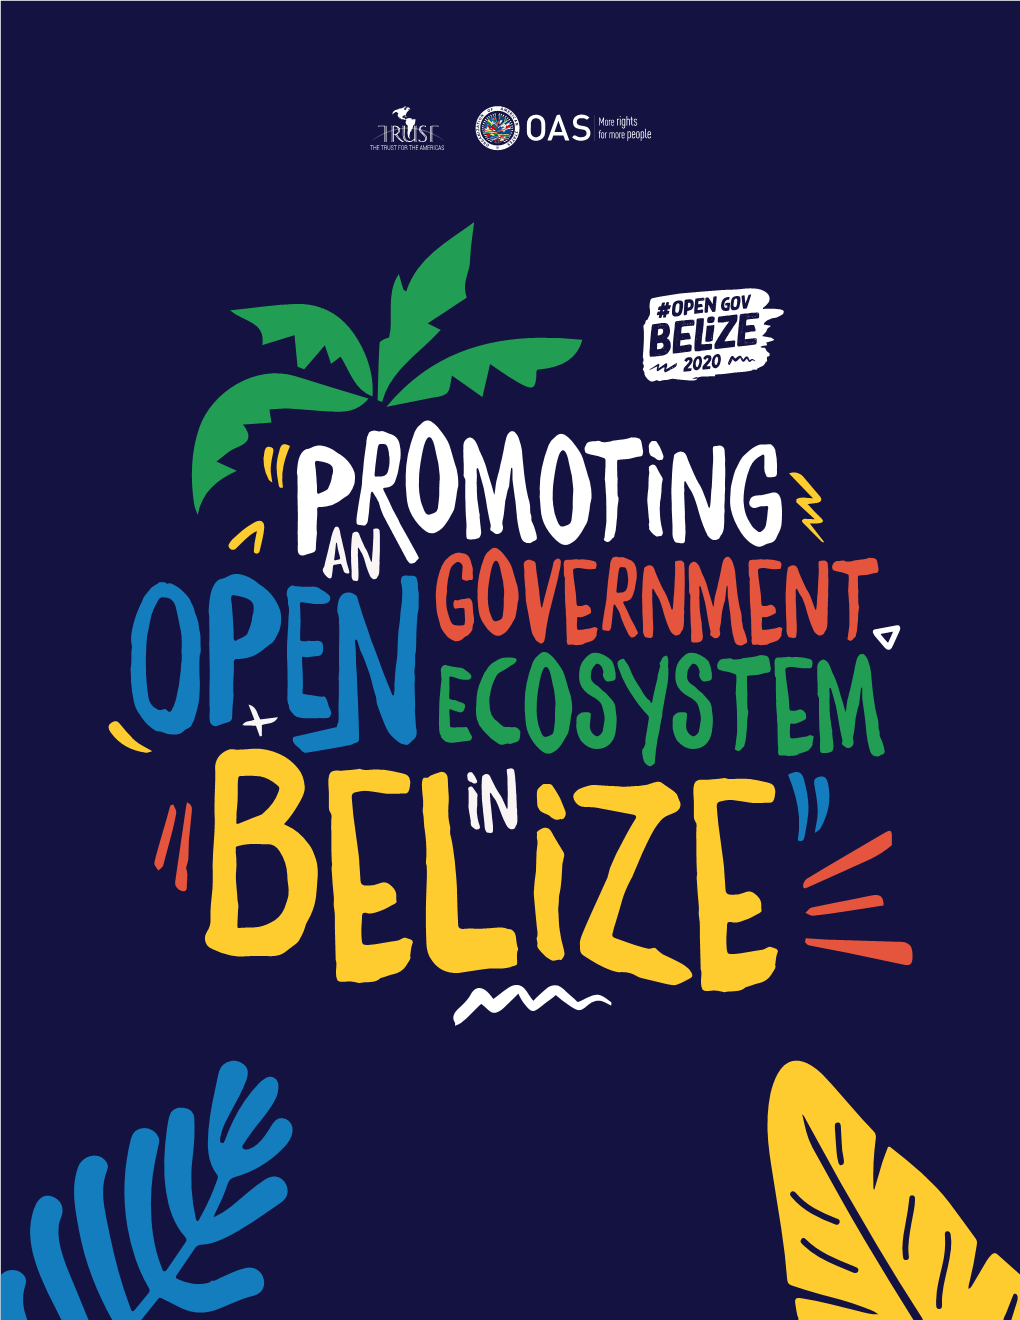 Belize for Their Contribution to This Project